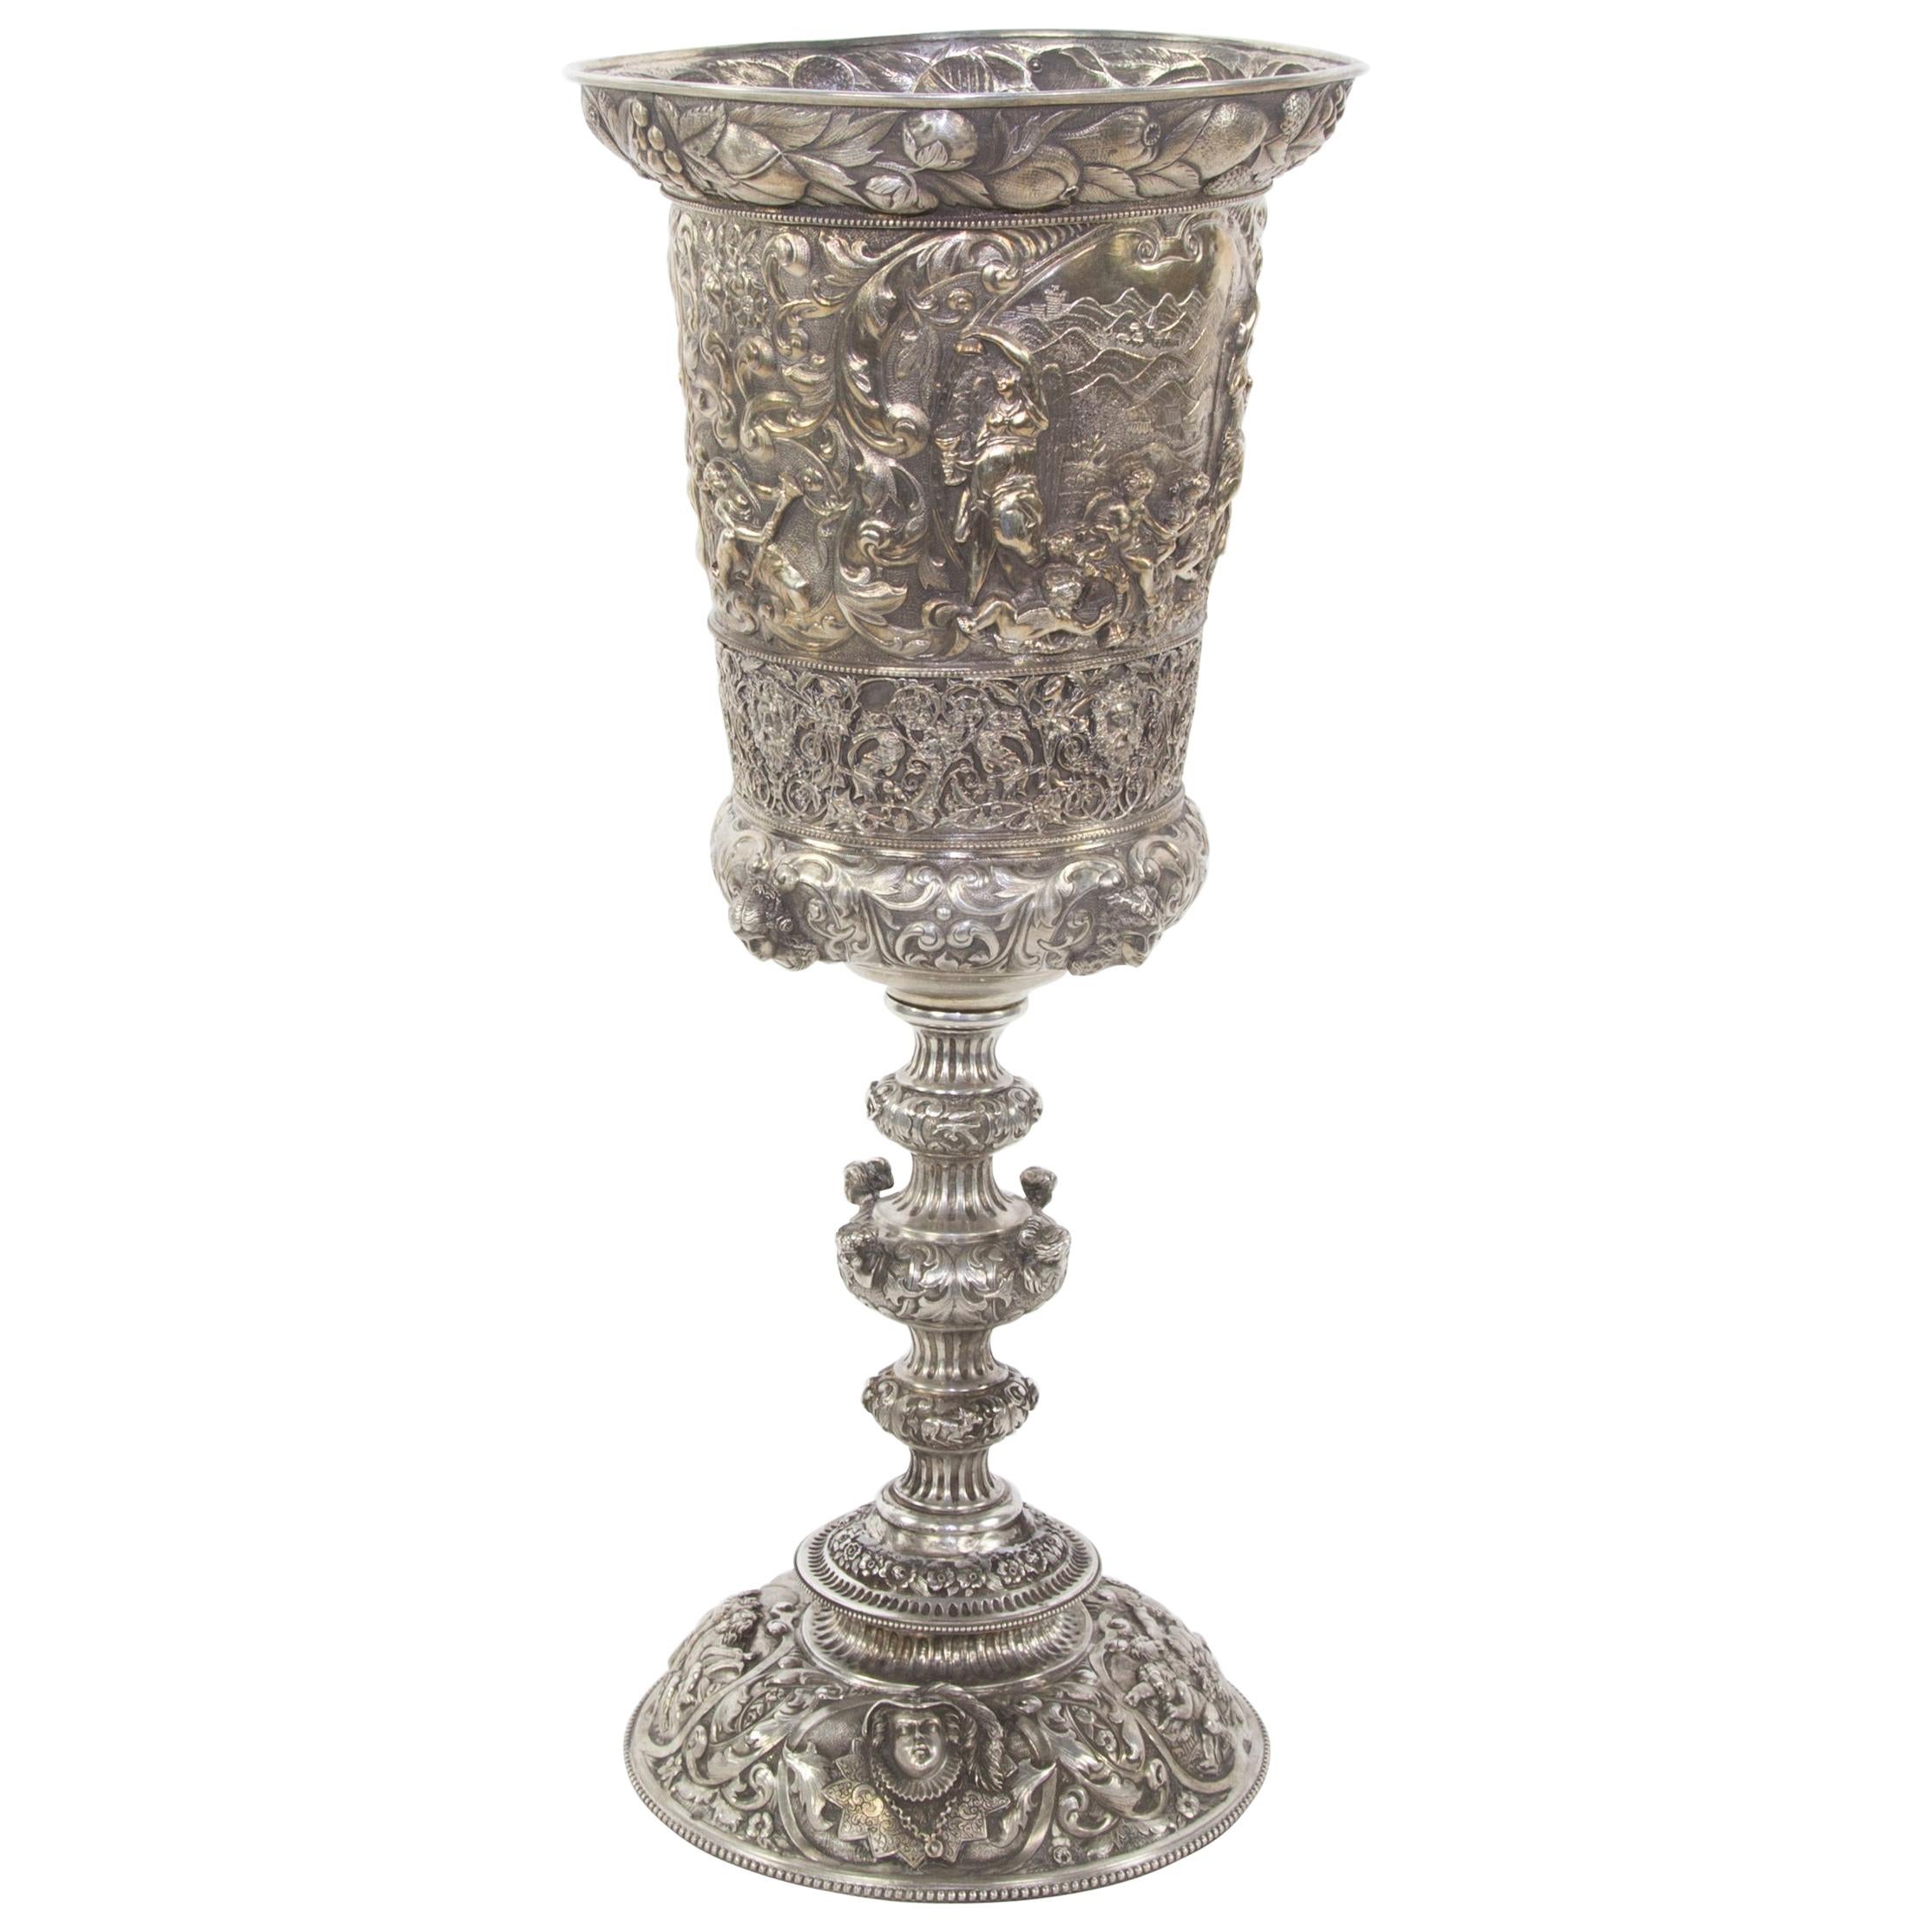 Magnificent Antique Large Silver Chalice